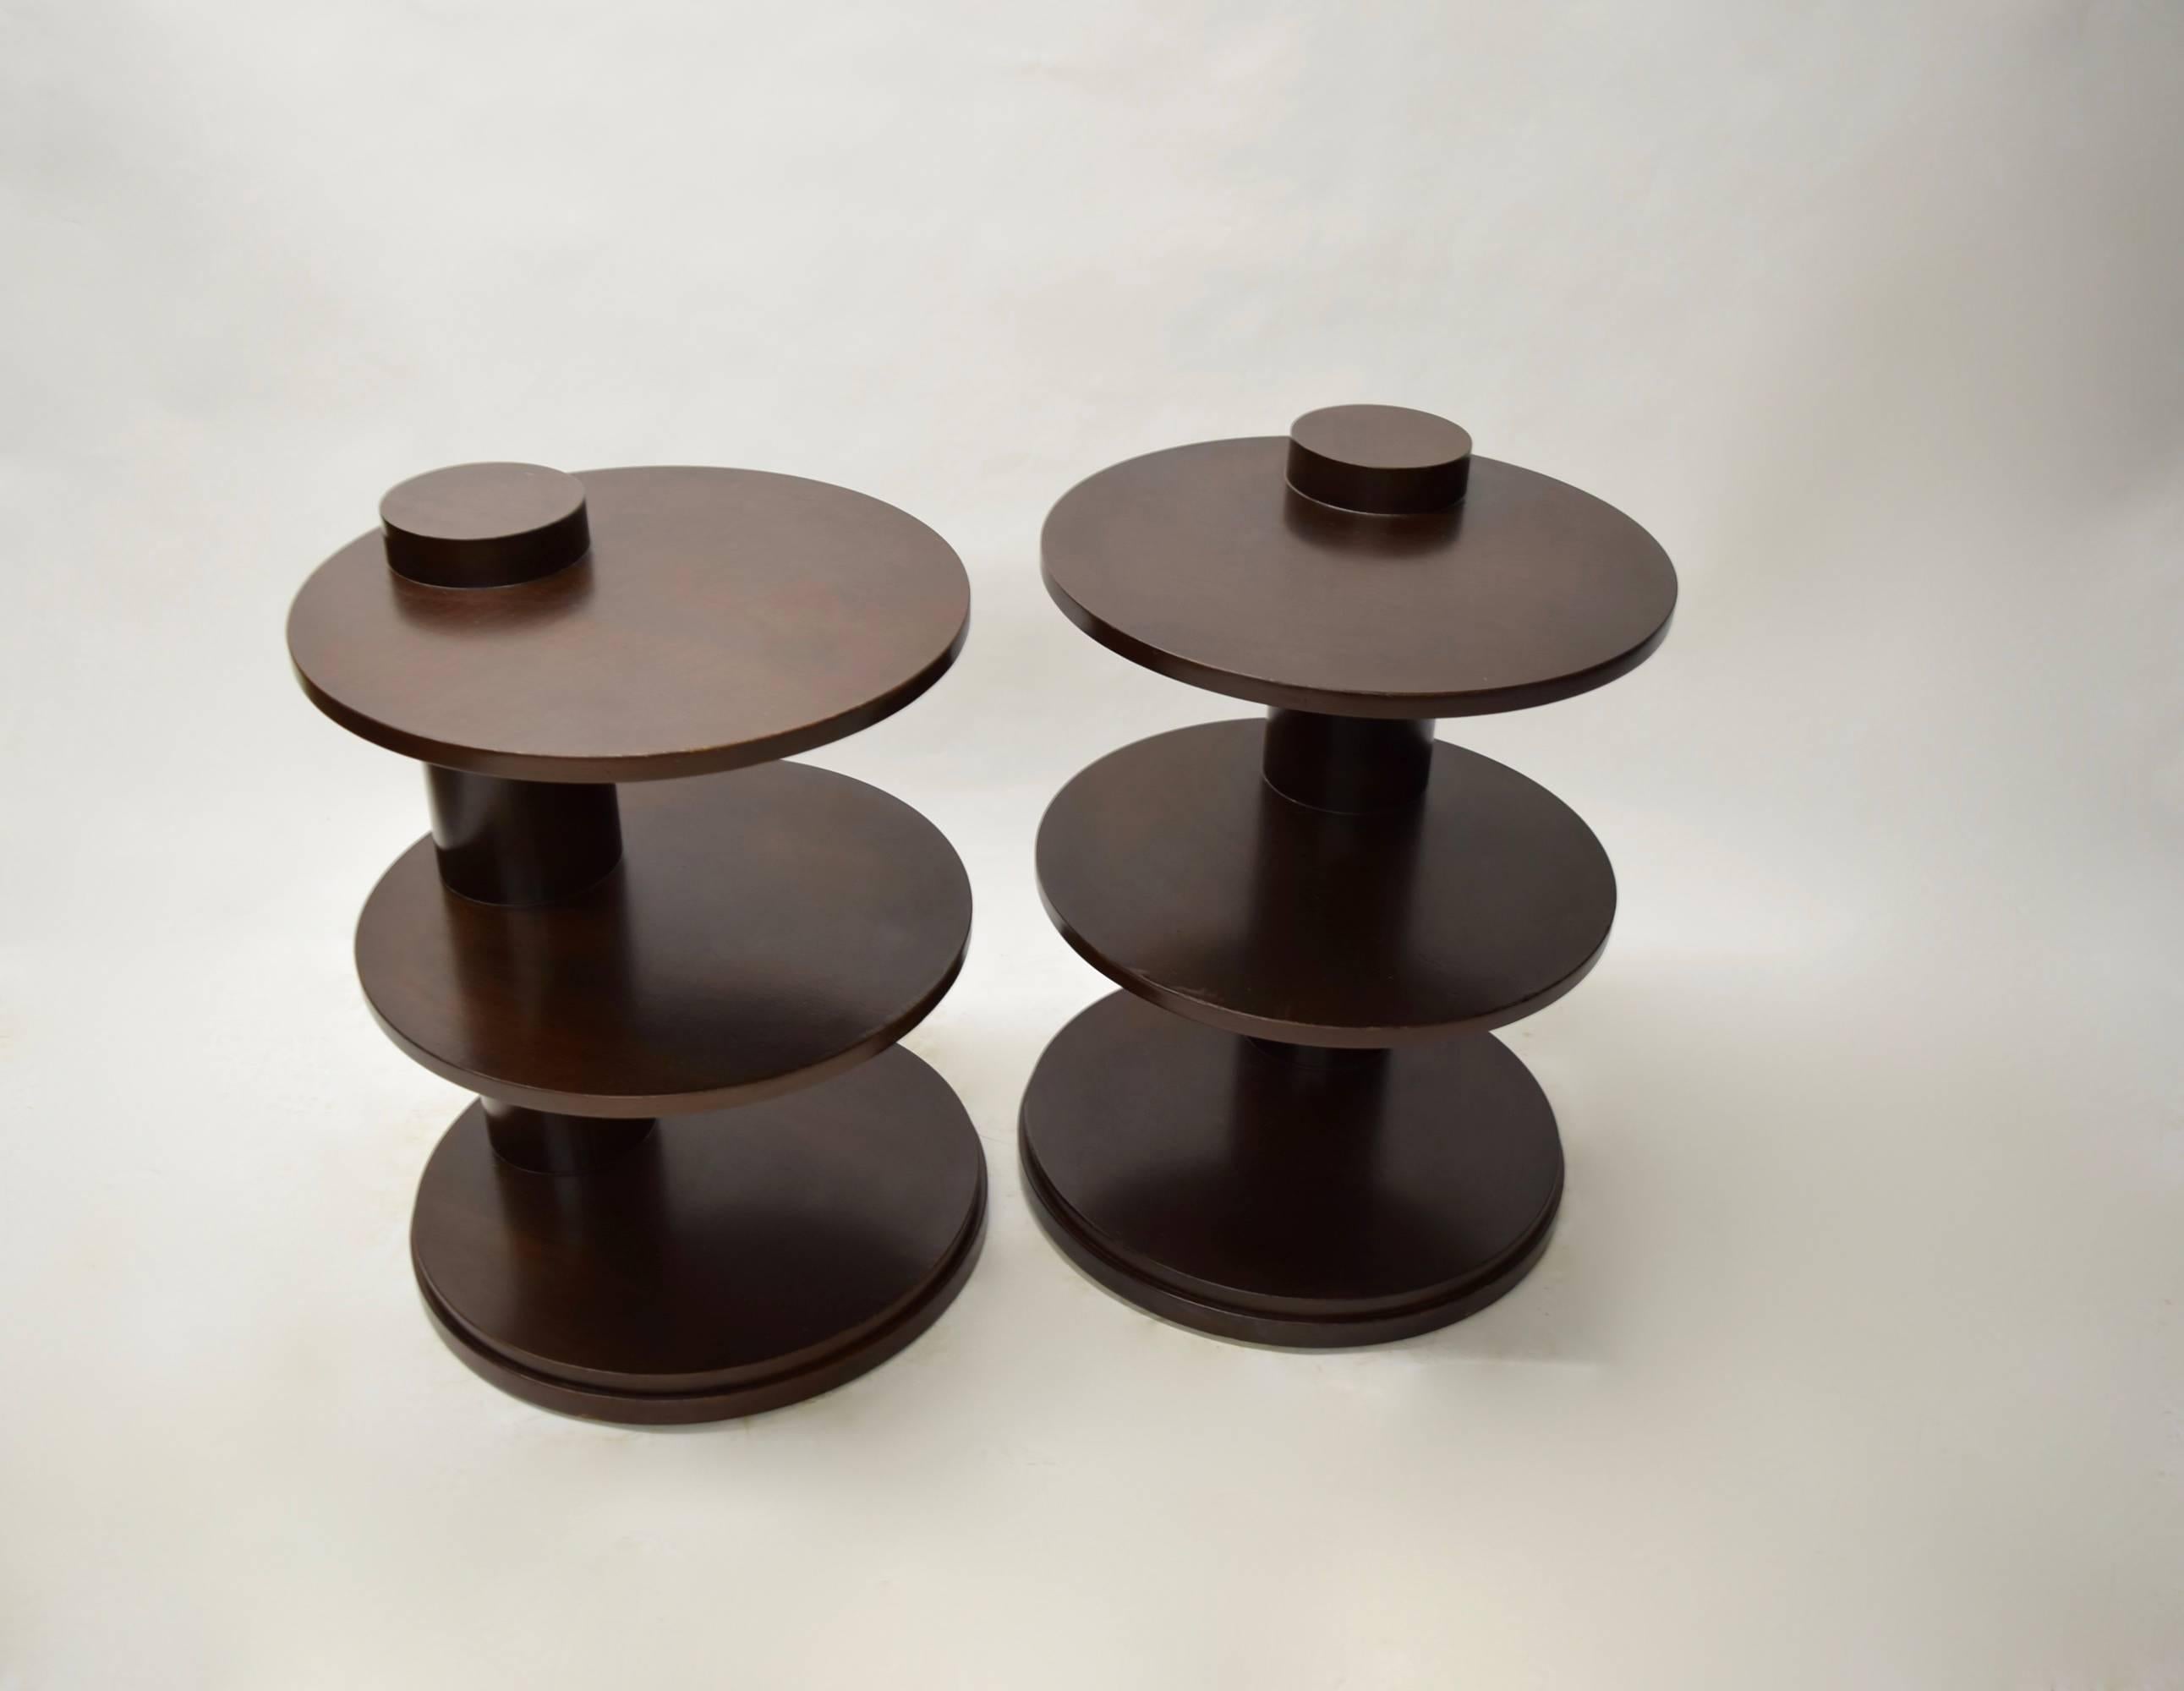 Late 20th Century Pair of Solid Walnut Side Tables by Ralph Lauren, circa 1995 Made in USA